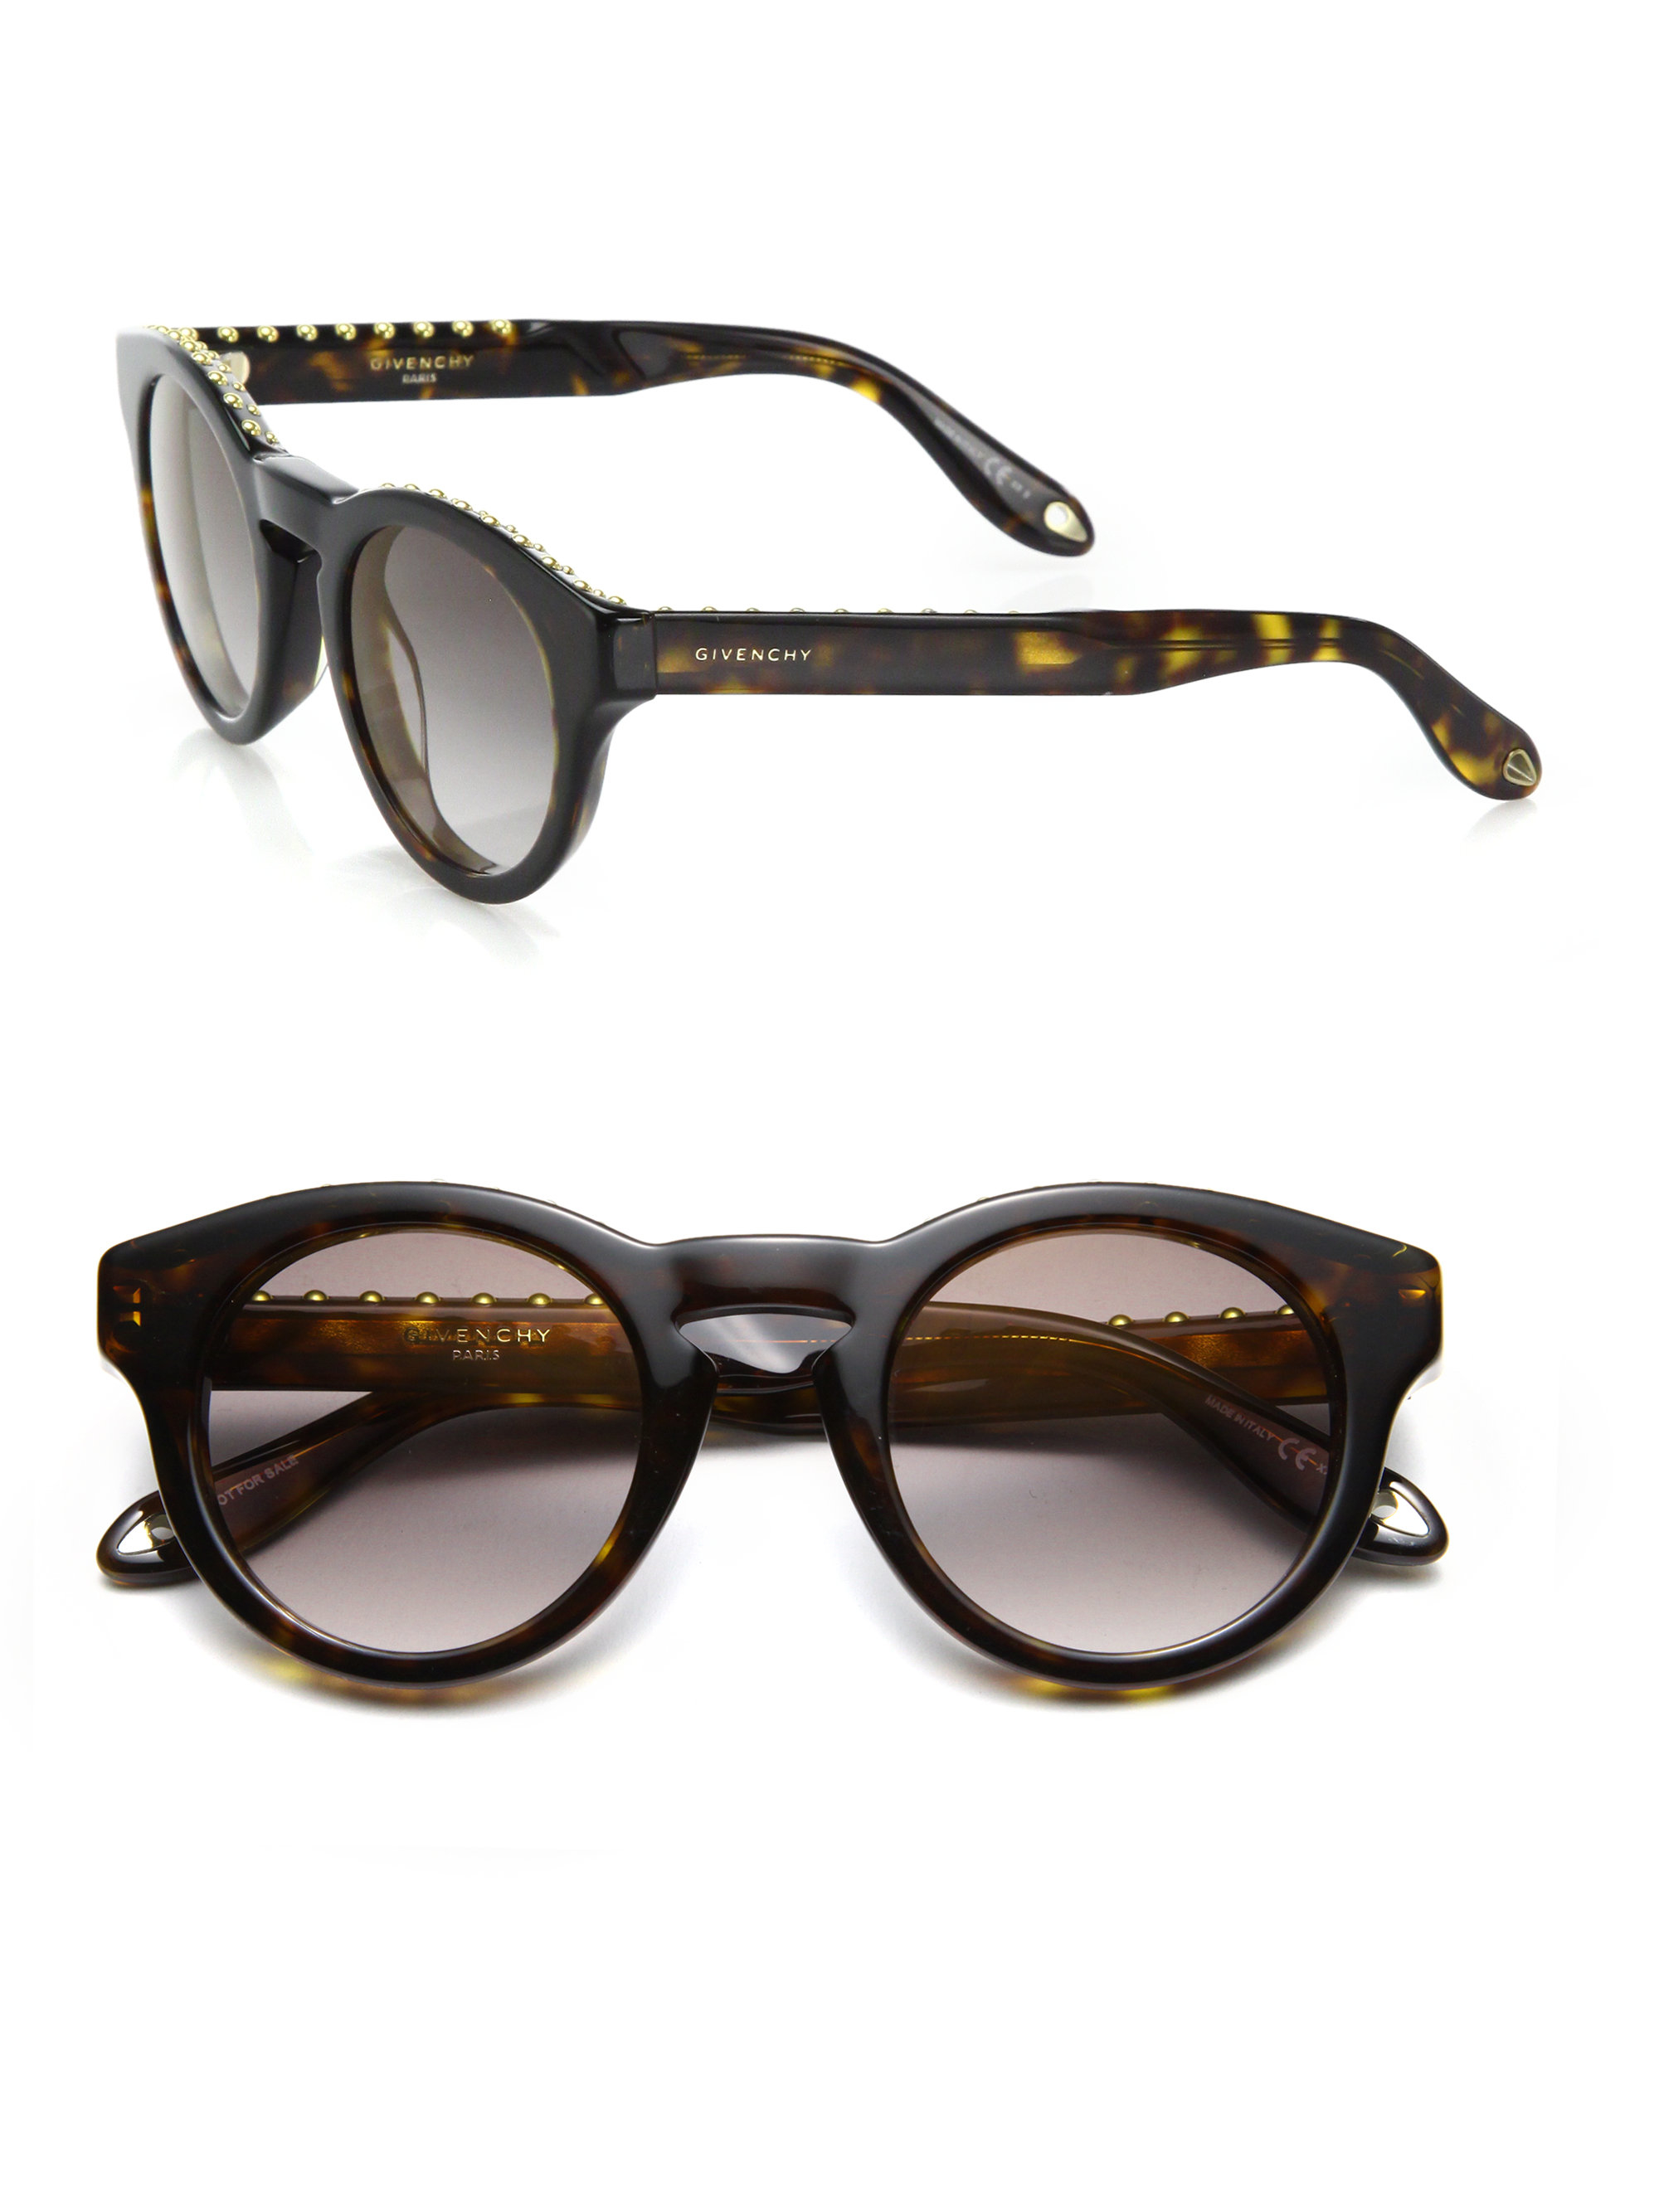 Givenchy 48mm Rounded Studded Acetate Sunglasses in Black | Lyst